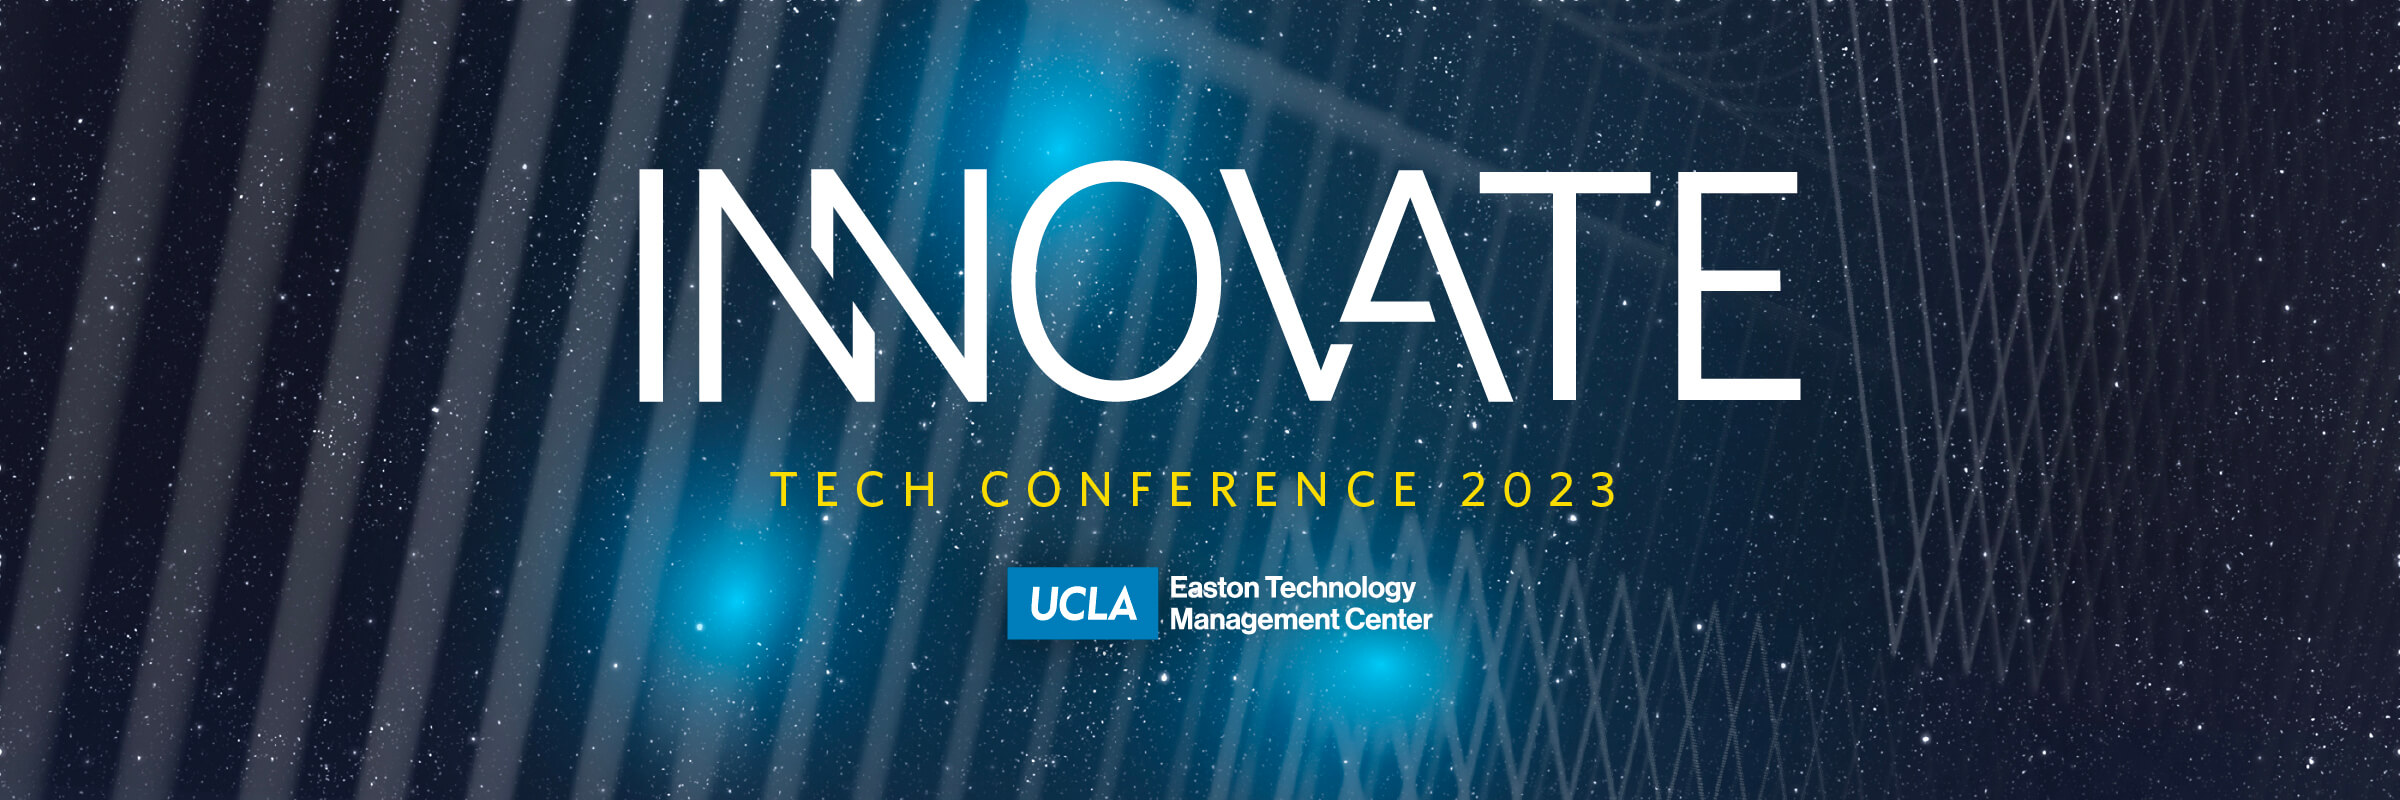 Innovate Conference 2023